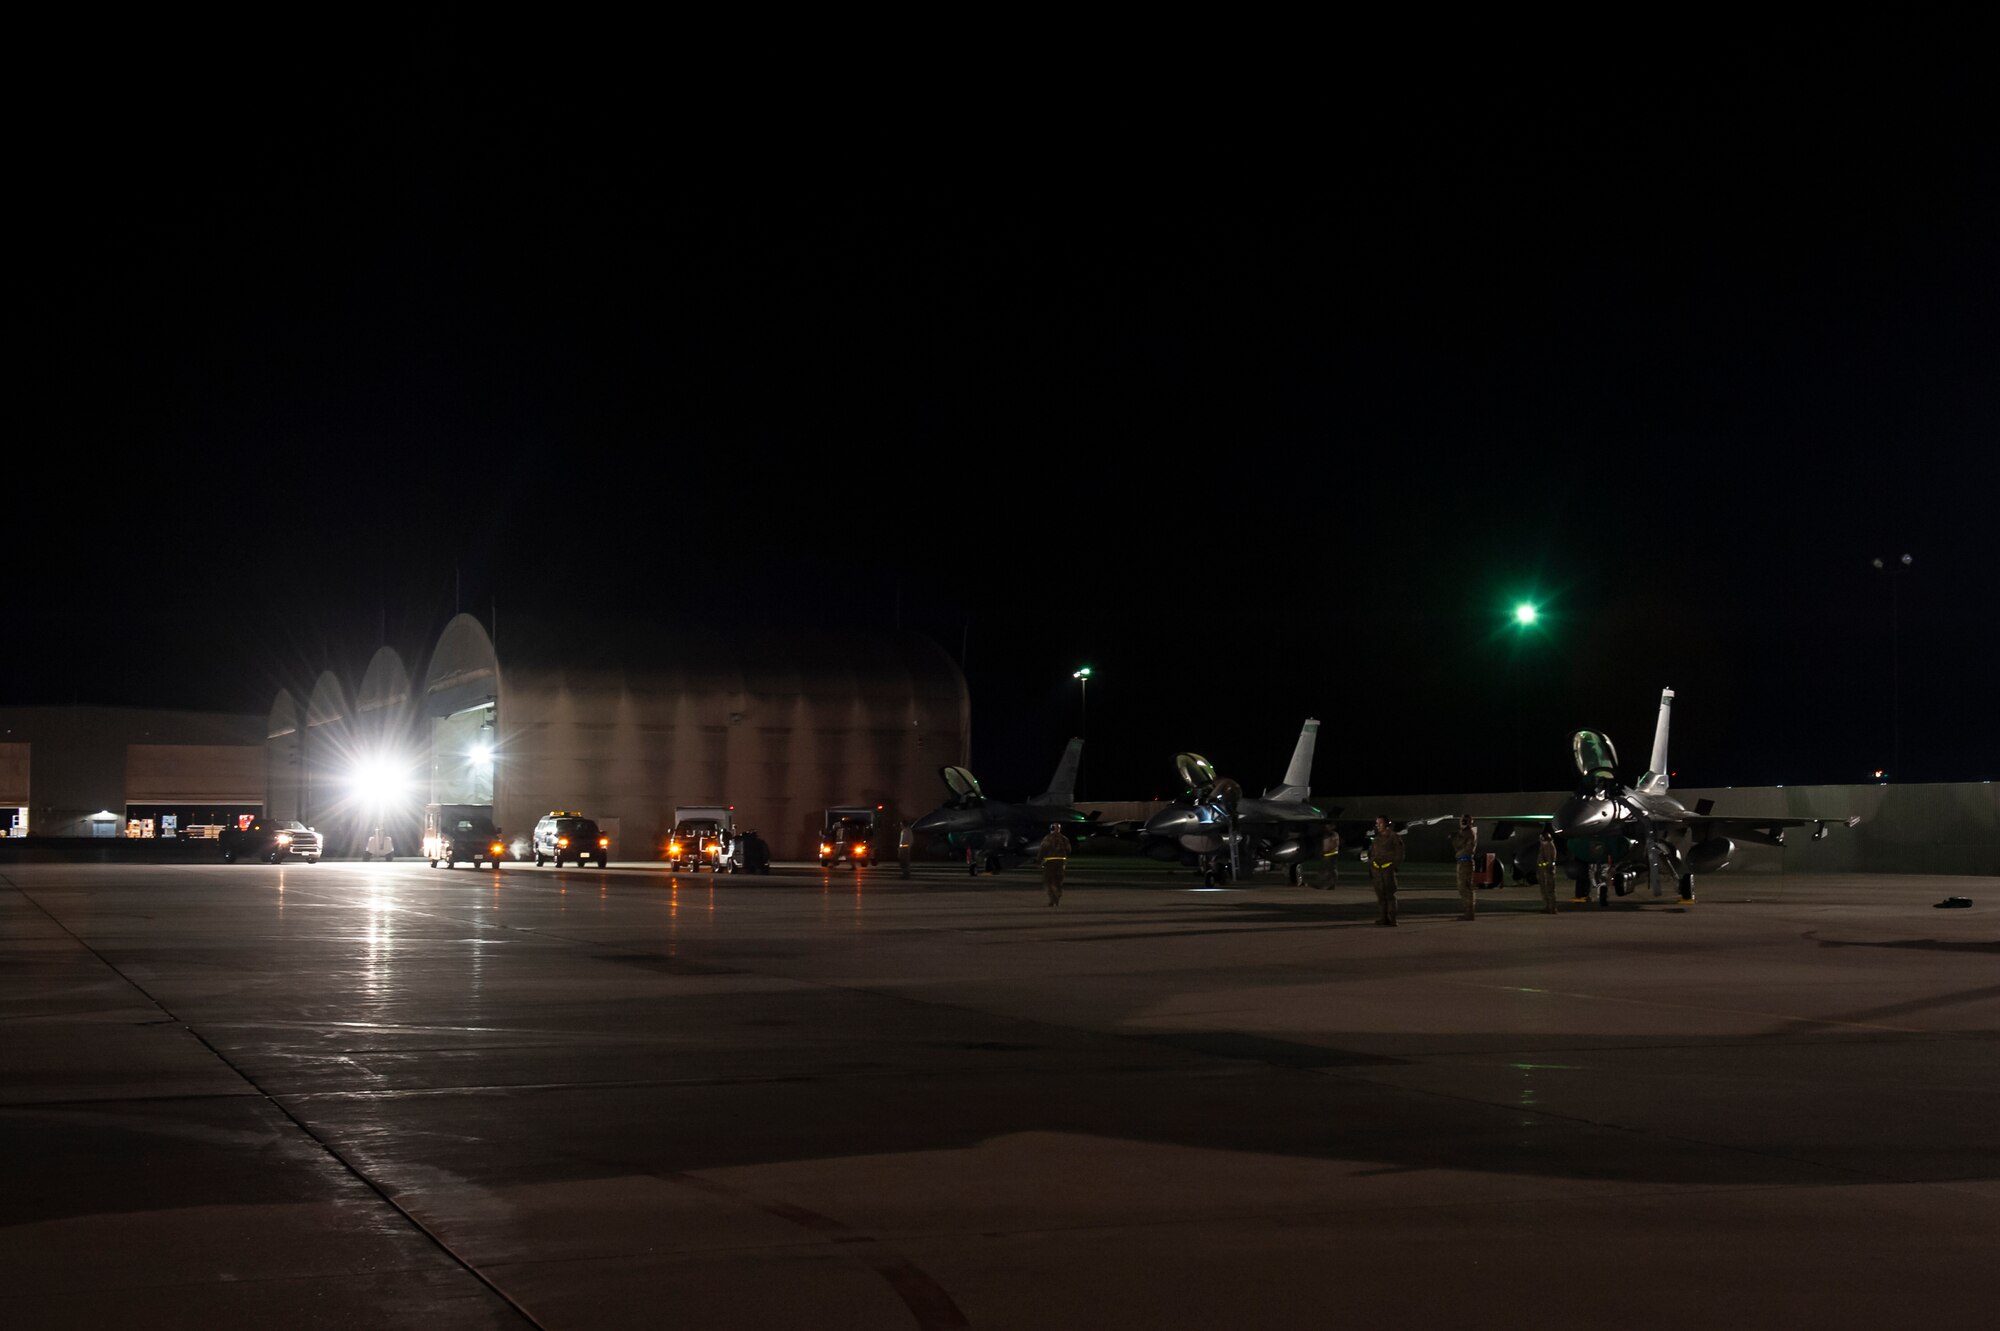 U.S. Air Force Airmen, assigned to the Ohio National Guard’s 180th Fighter Wing, prepare F-16 Fighting Falcon fighter jets for an Aerospace Expeditionary Force deployment in the early morning hours, Oct. 12, 2020, at the 180FW in Swanton, Ohio.